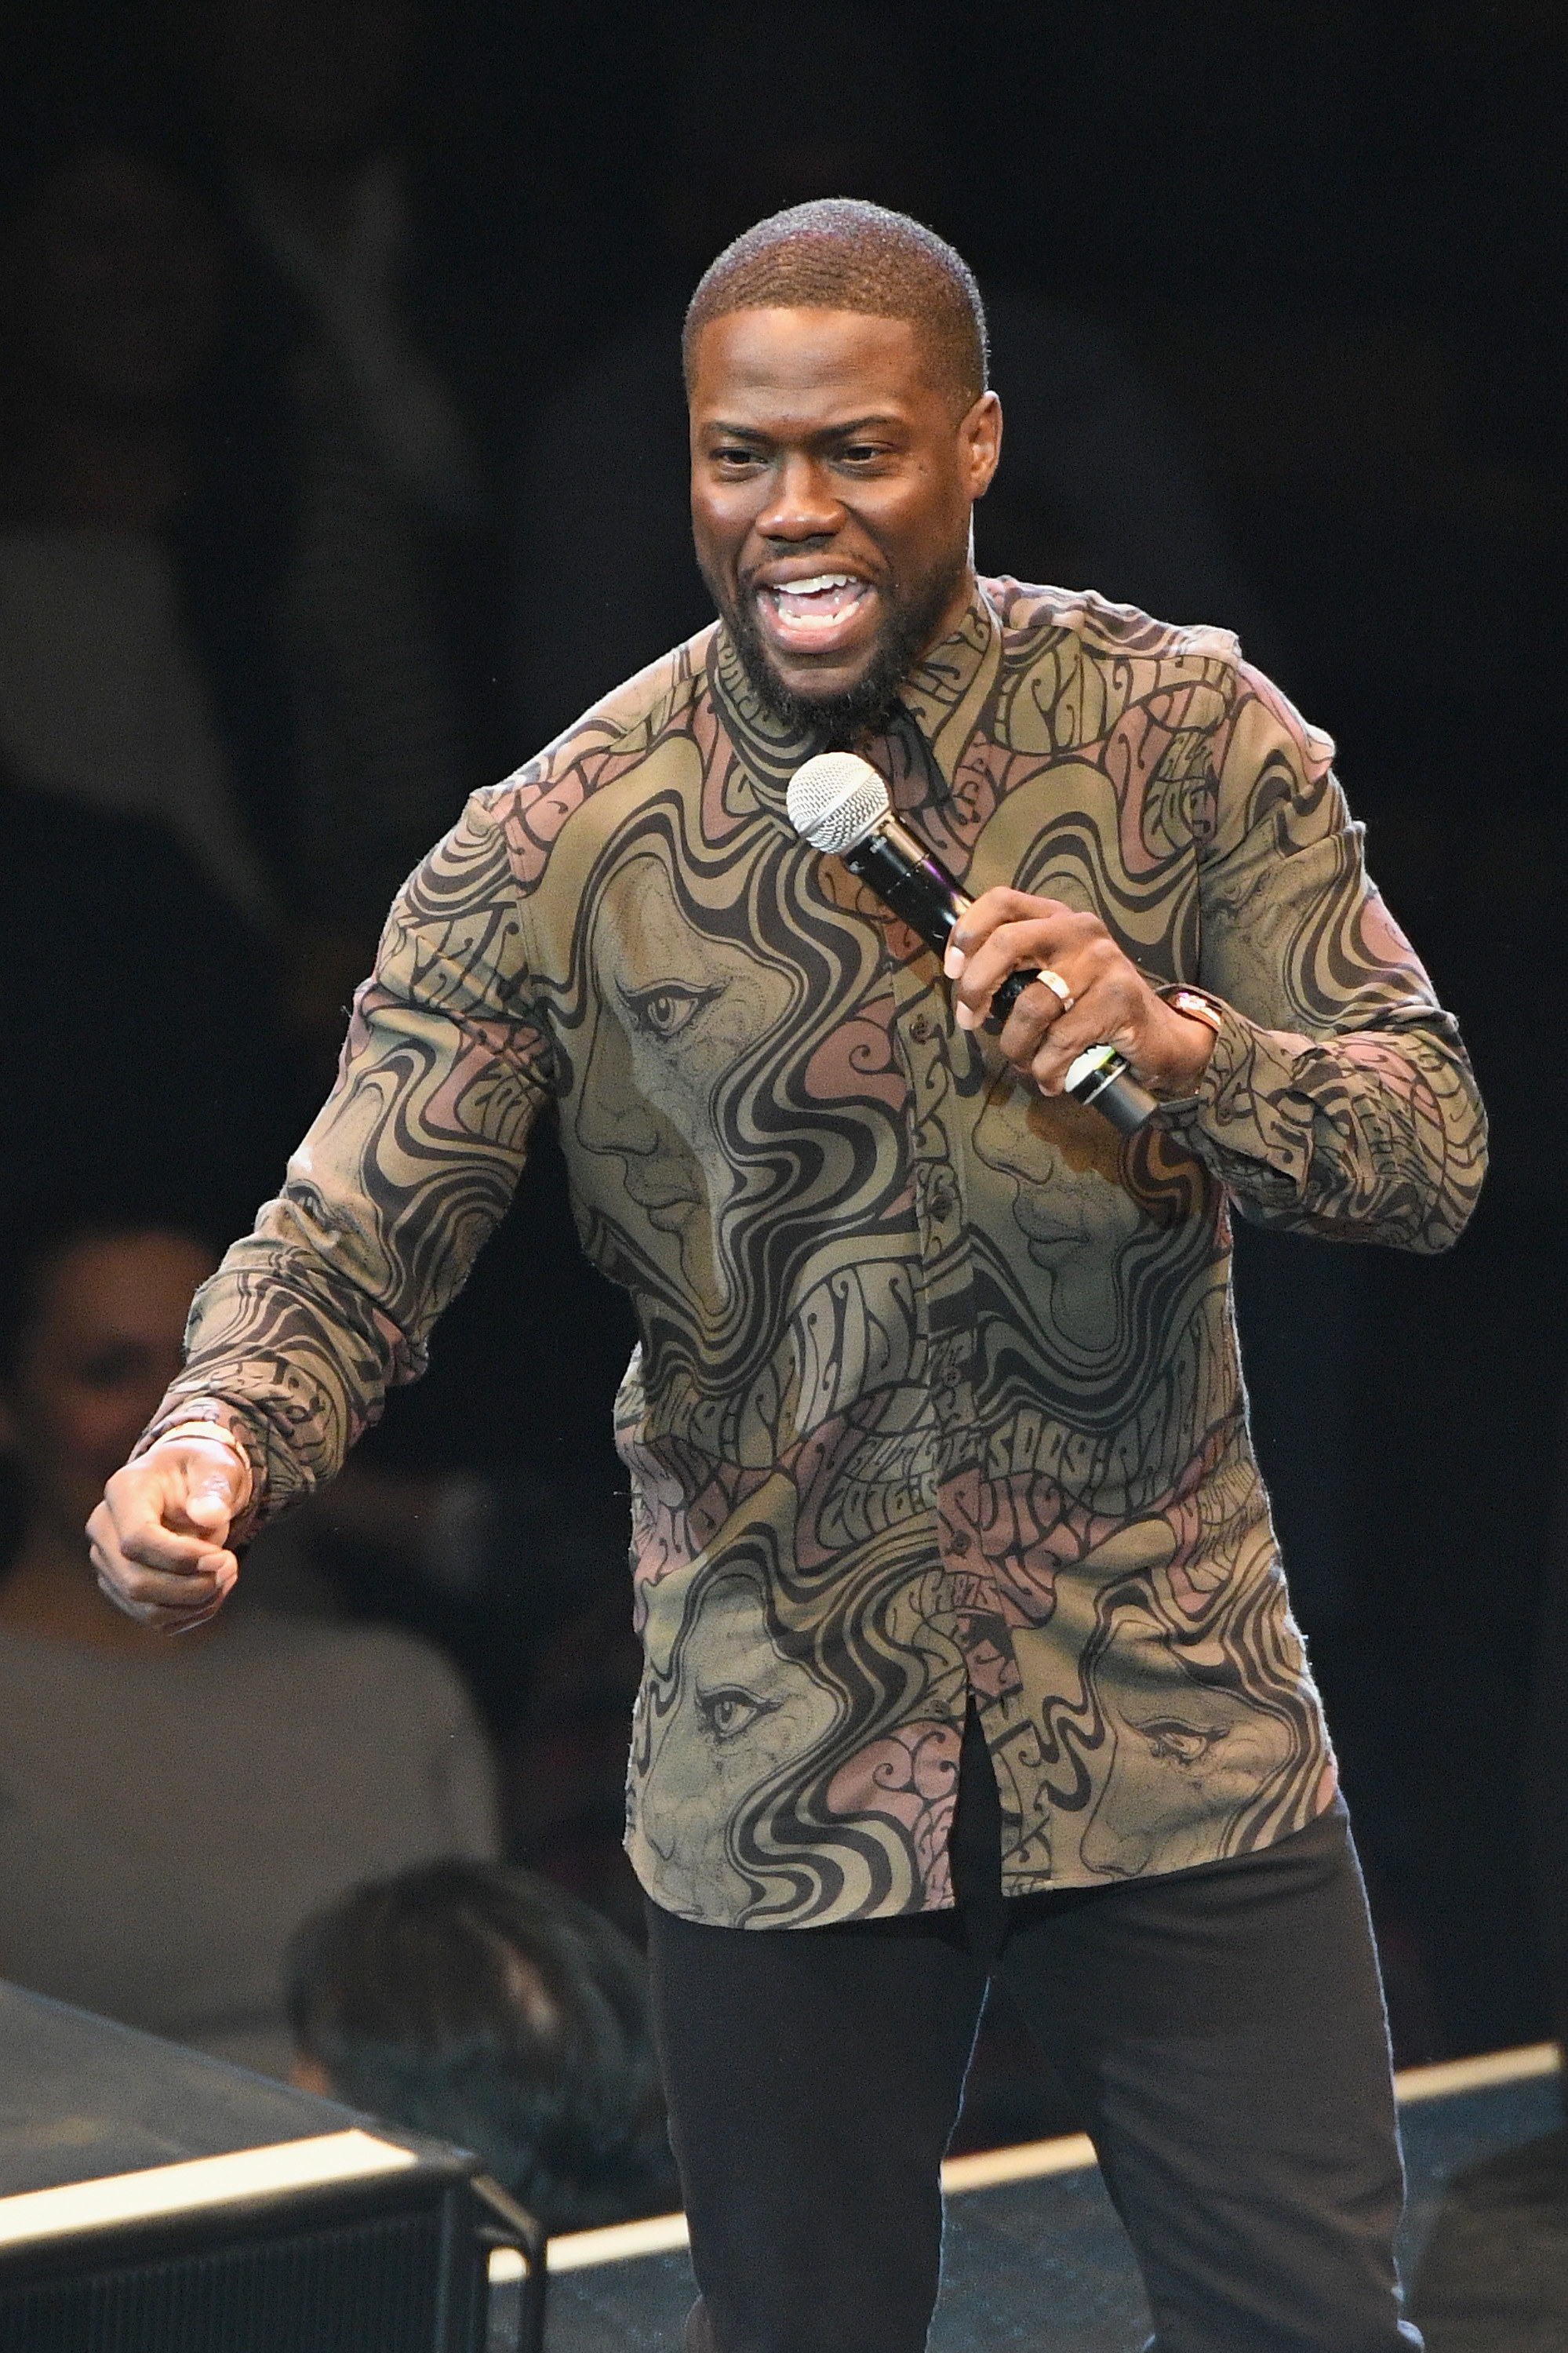 Kevin Hart performs stand-up onstage with a mic in hand